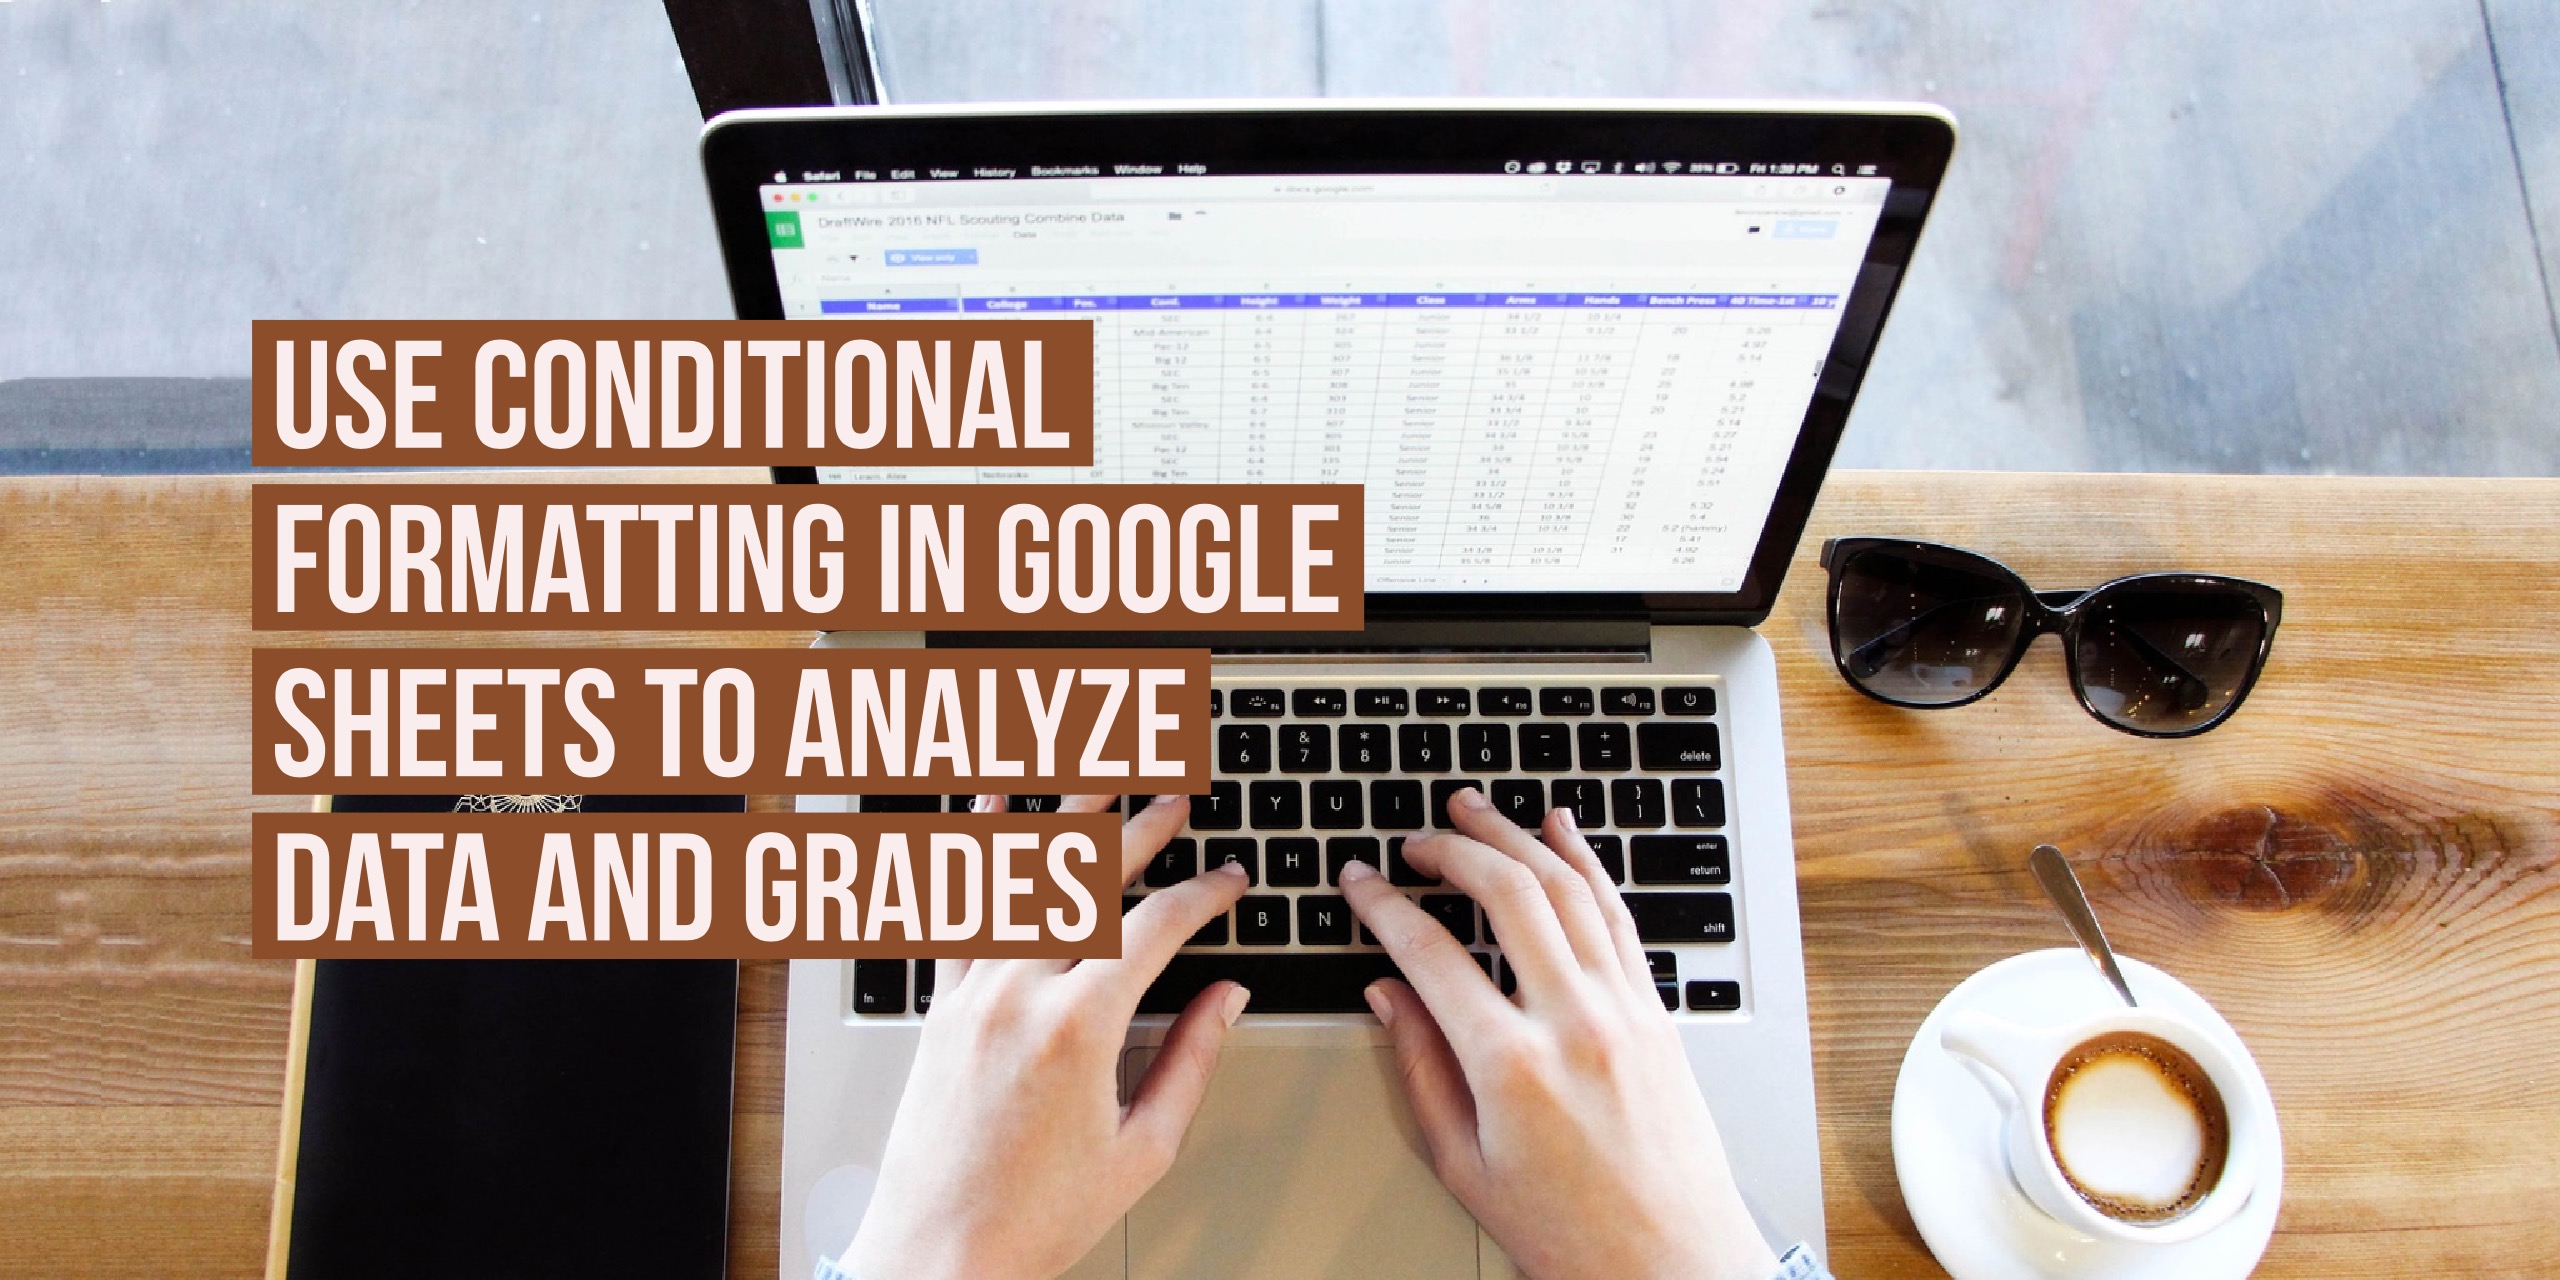 Use conditional formatting in Google Sheets to analyze data and grades